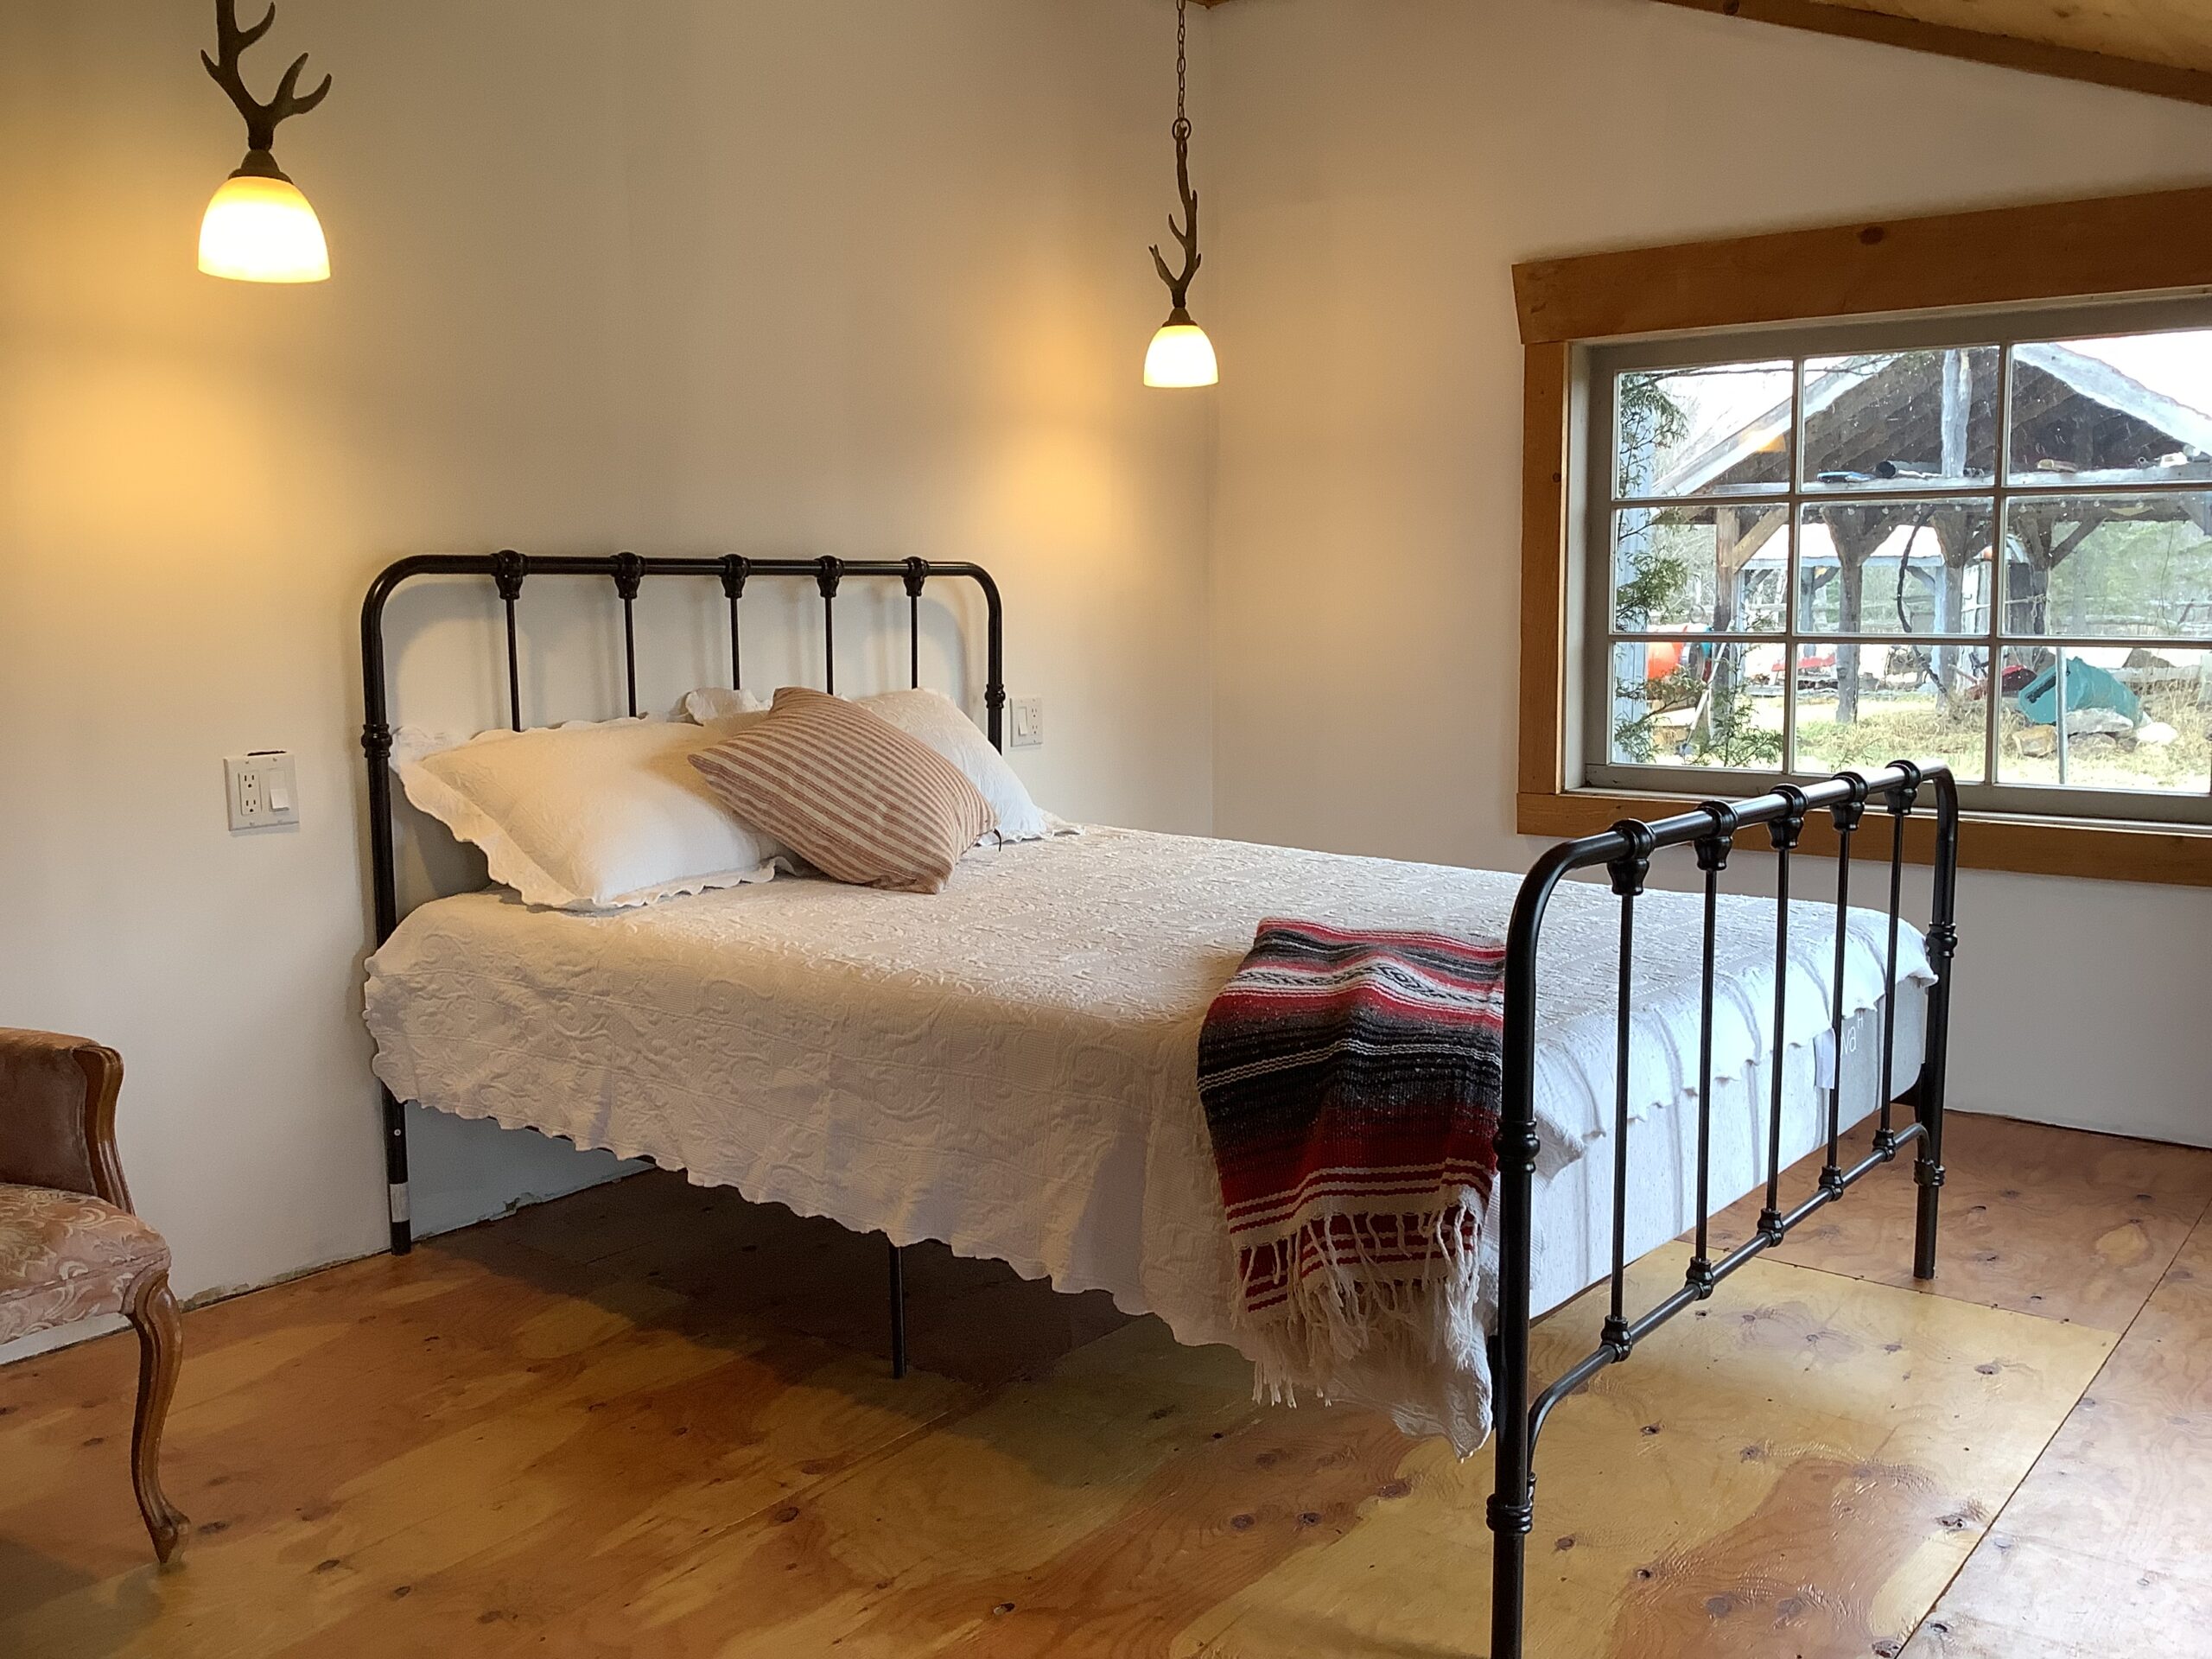 A bed with a black metal frame. Two light fixtures with a minimal antler design hang down over the bed, and there is a big window on the exterior wall.